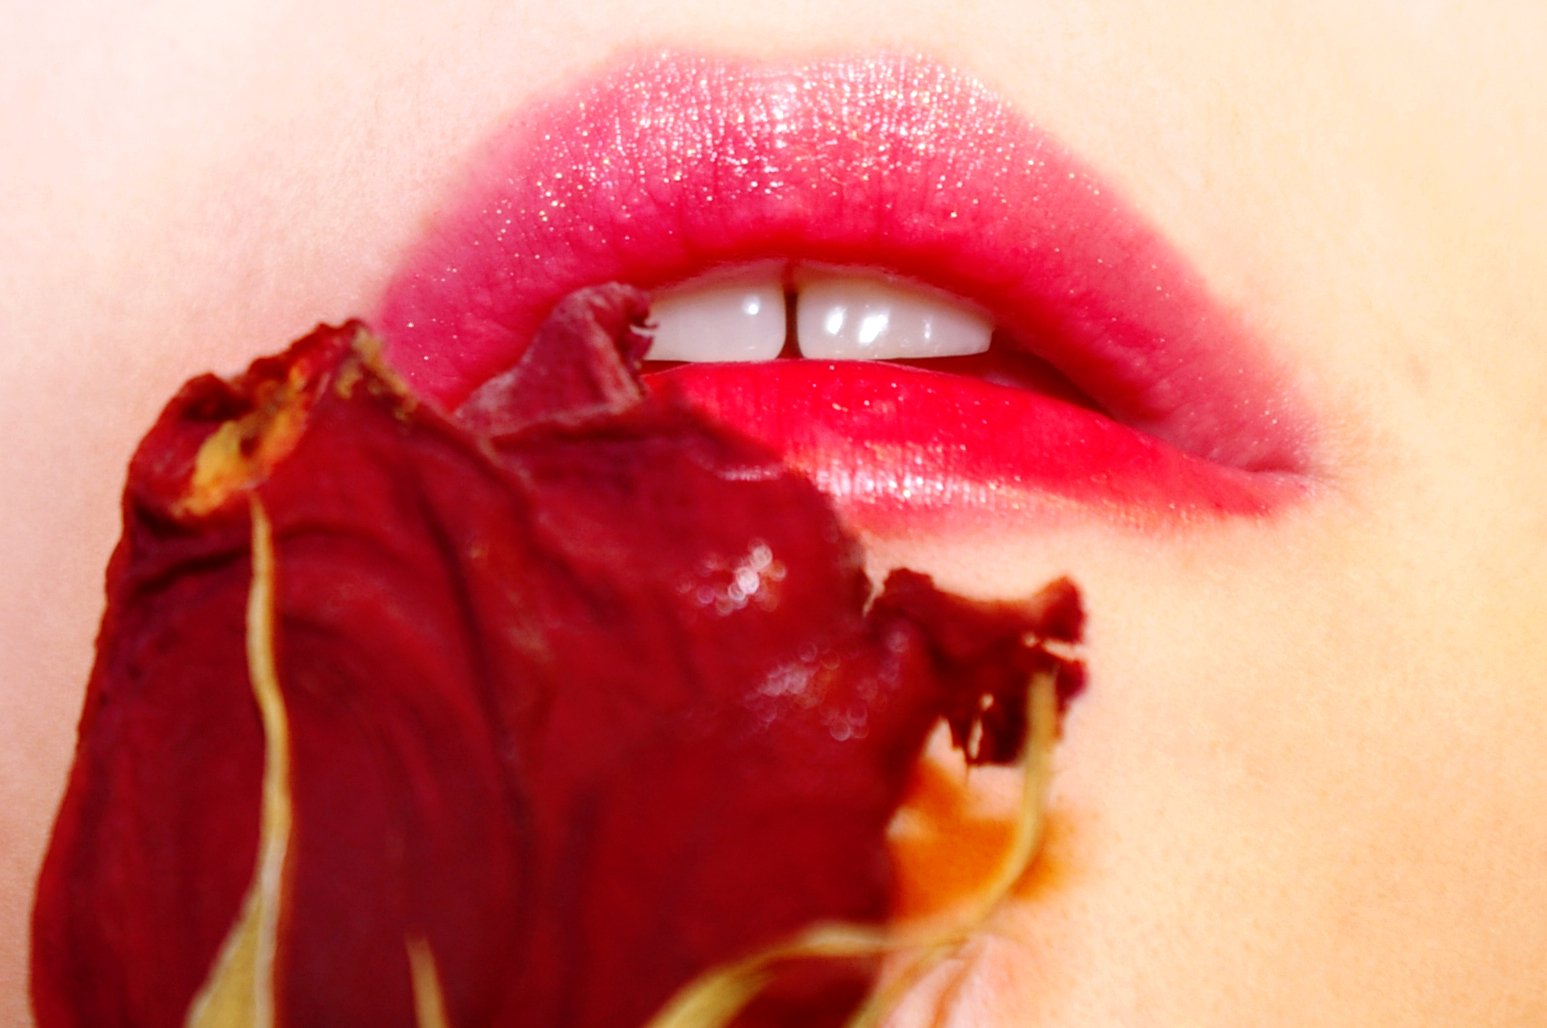 a close up view of a person's lips with rose petals